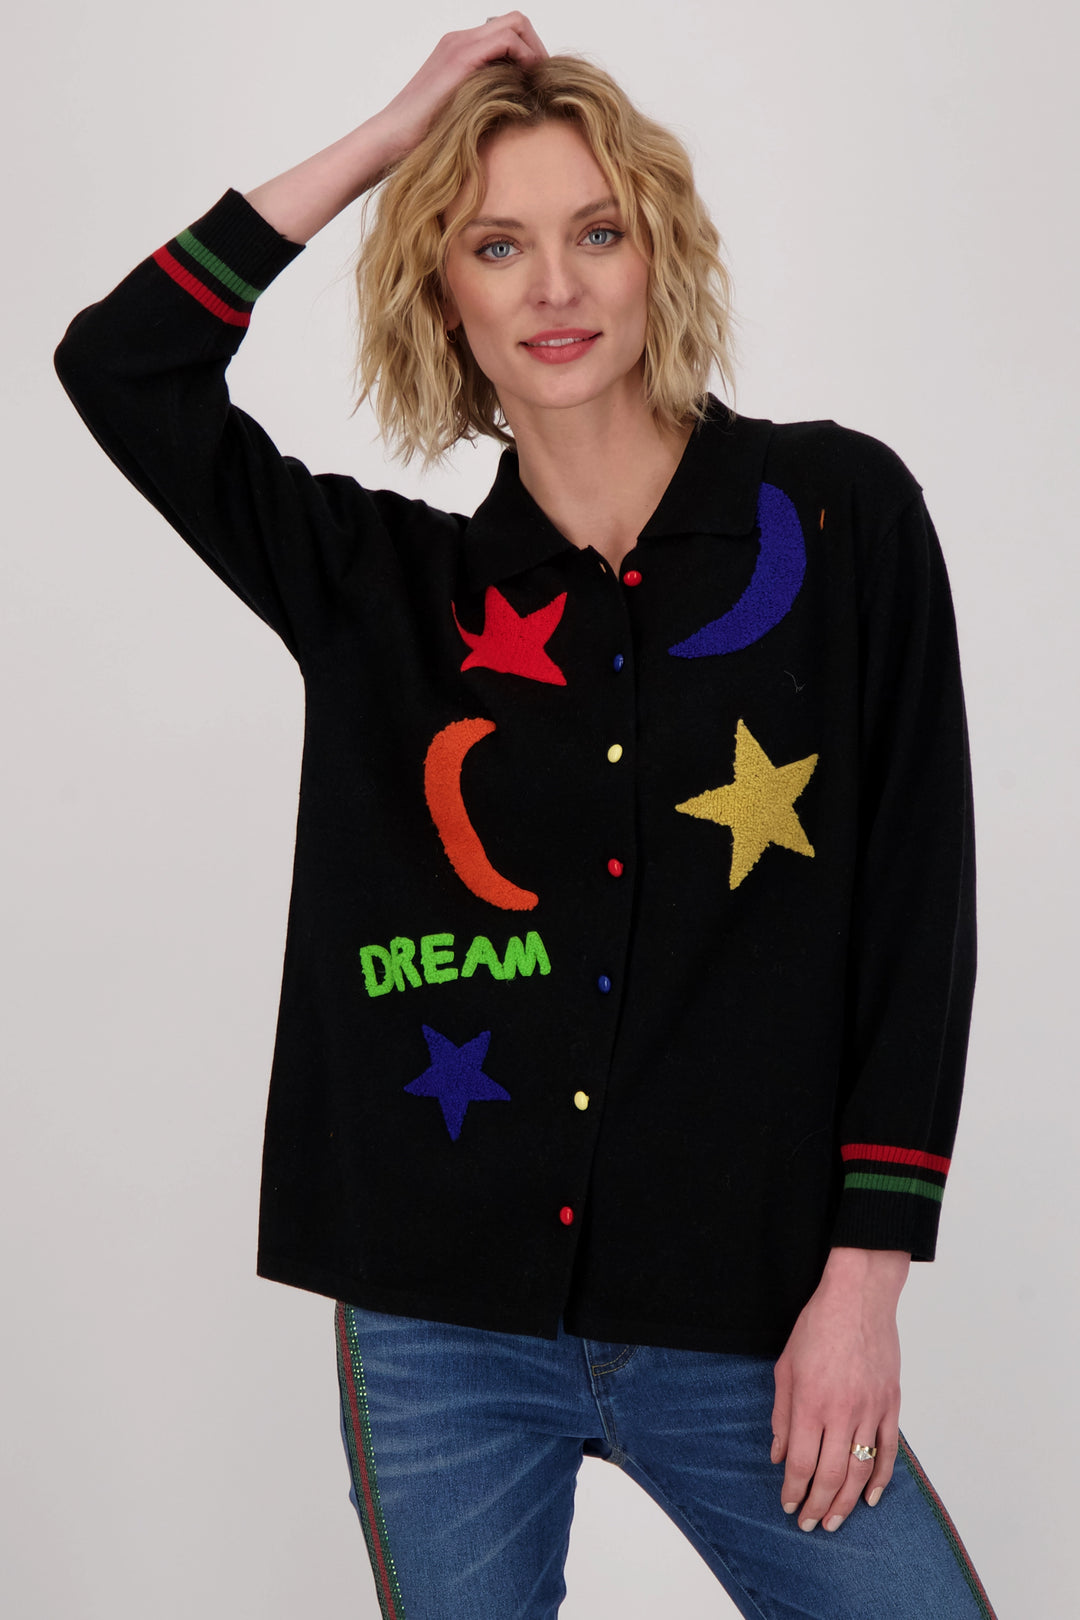 Featuring a standout stars and crescent moon pattern, this light sweater will be sure to make you shine!